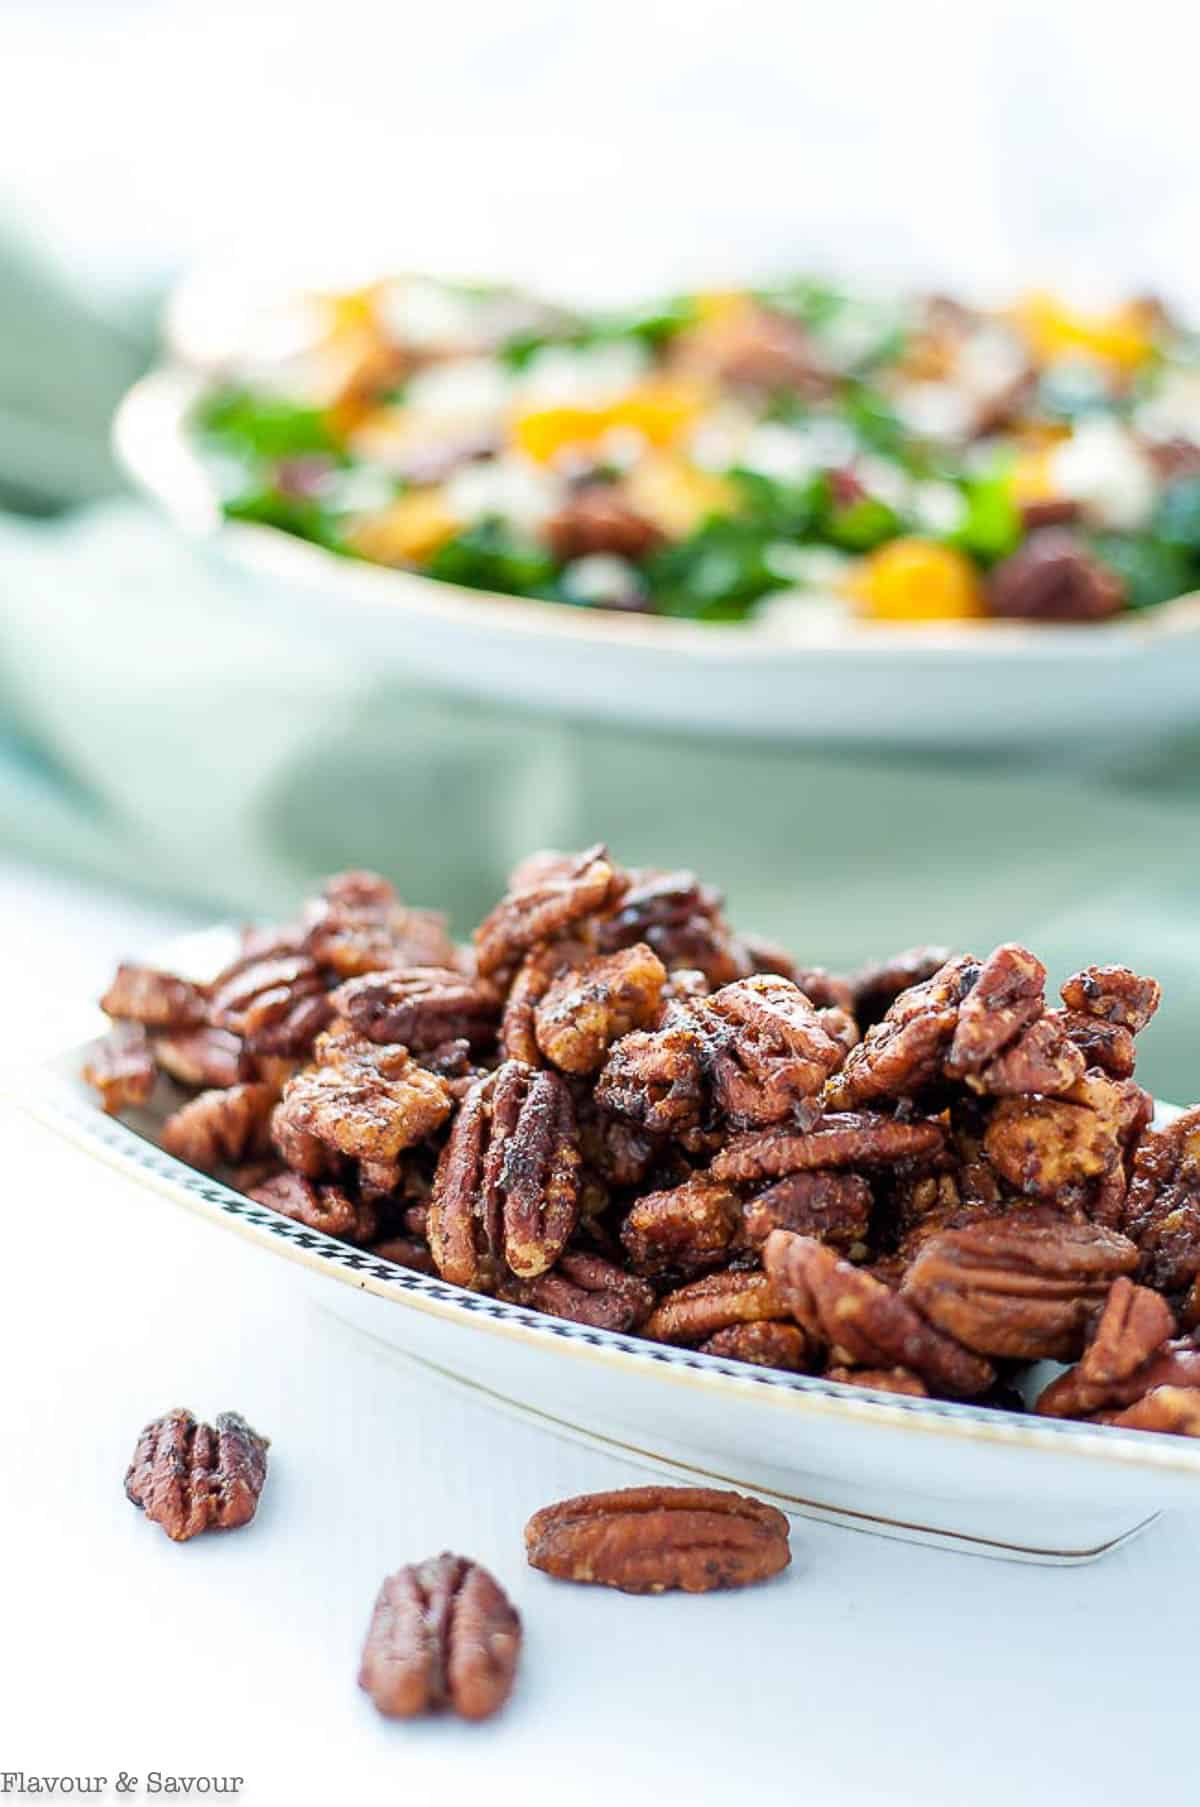 A serving dish with caramel spiced pecans and a salad in the background.